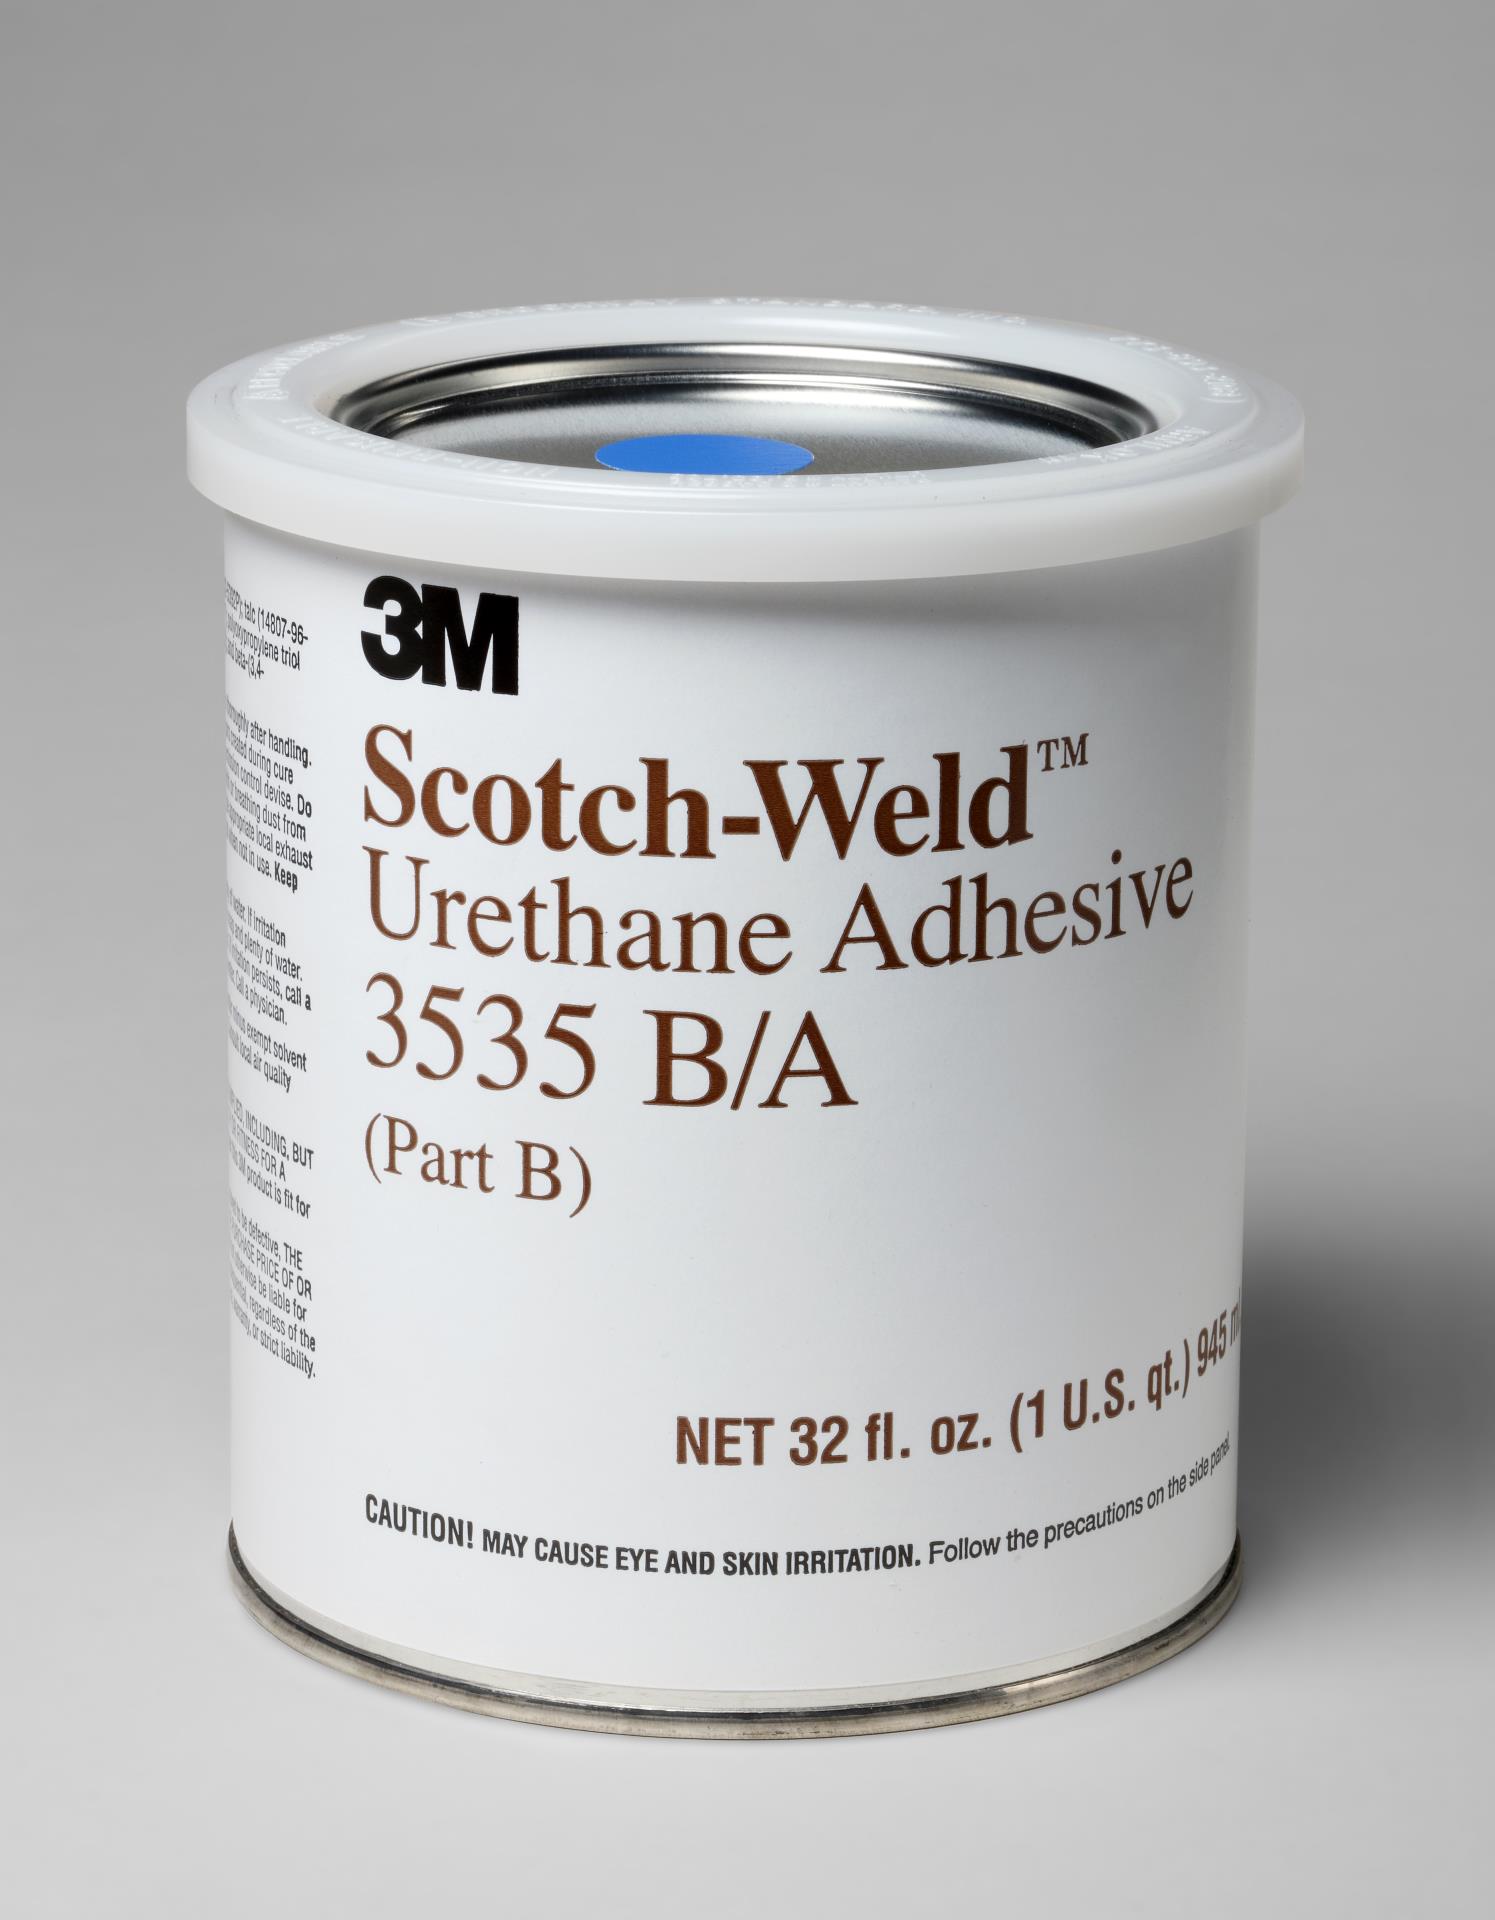 https://www.e-aircraftsupply.com/ItemImages/99/7010310199_3M_Scotch-Weld_Urethane_Adhesive_3535_Off-White_Part_BA.jpg